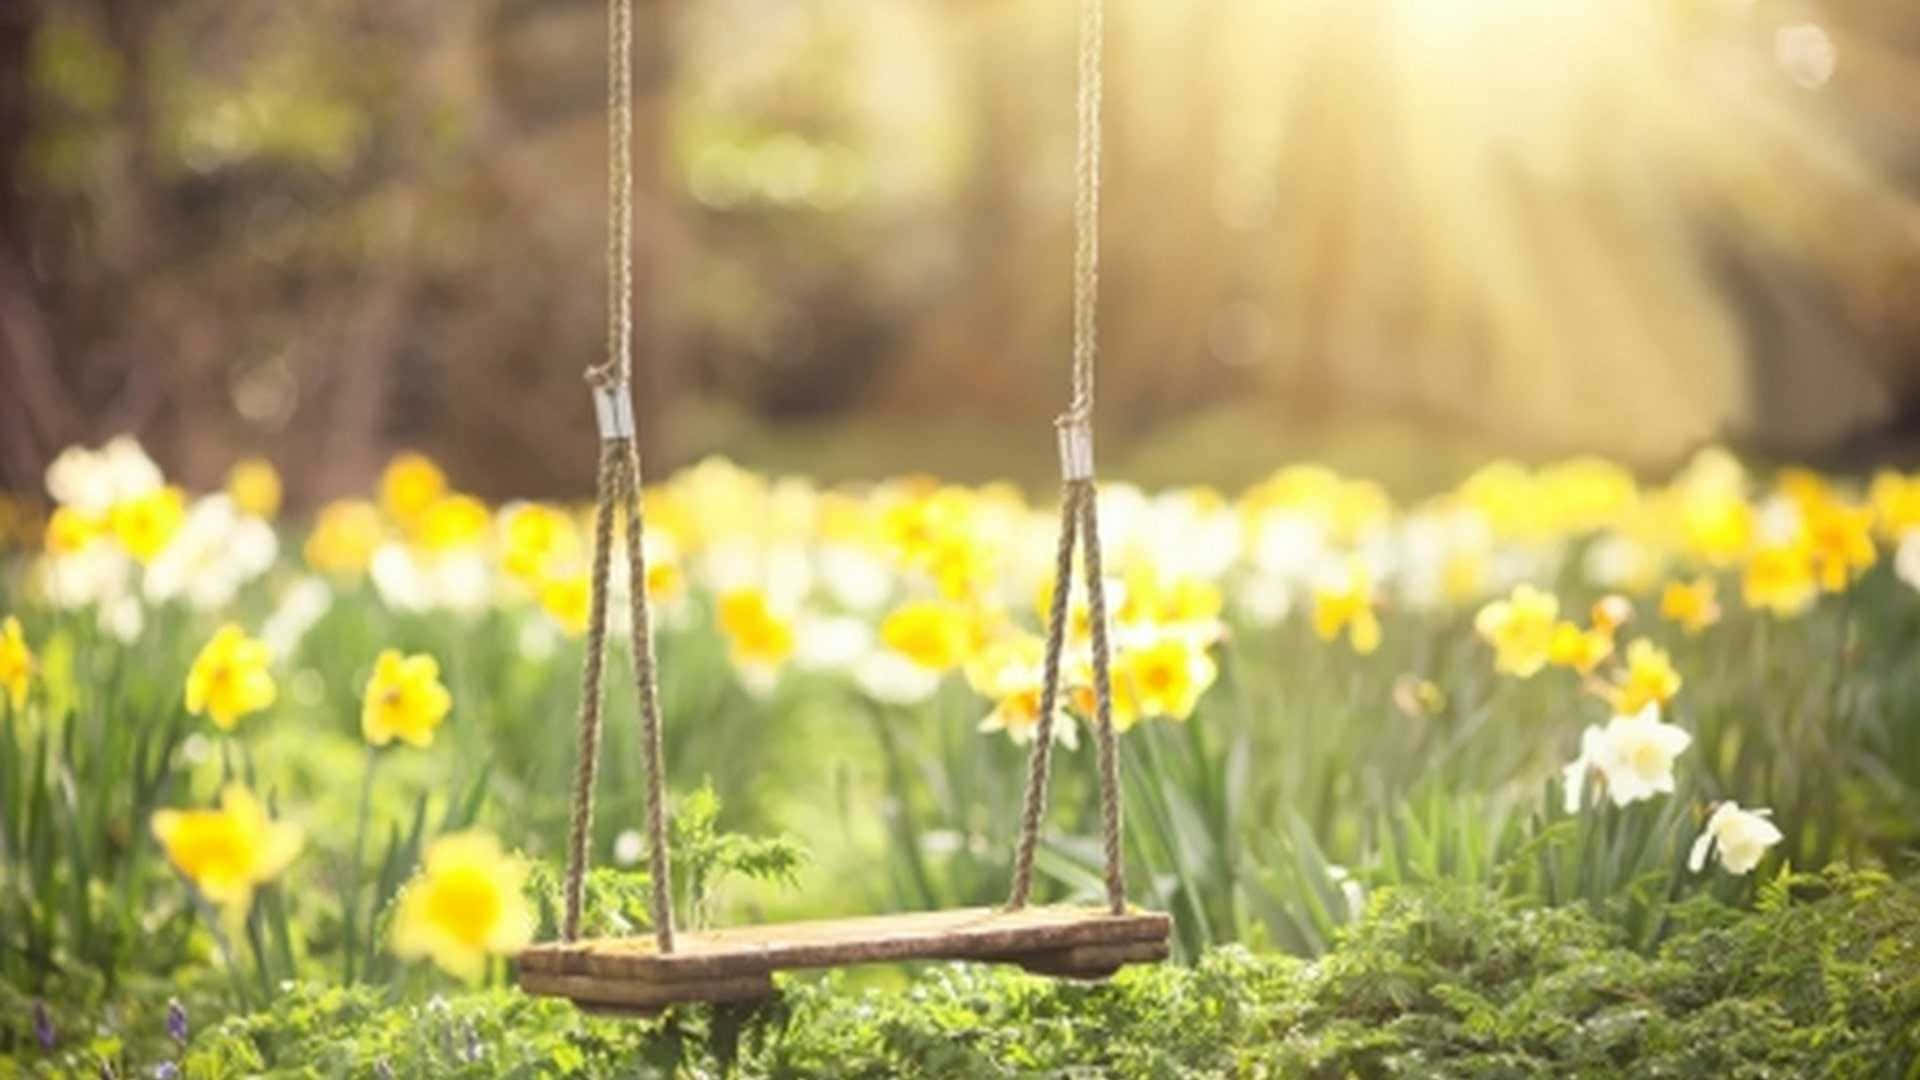 Embrace nature's beauty with this HD Spring background